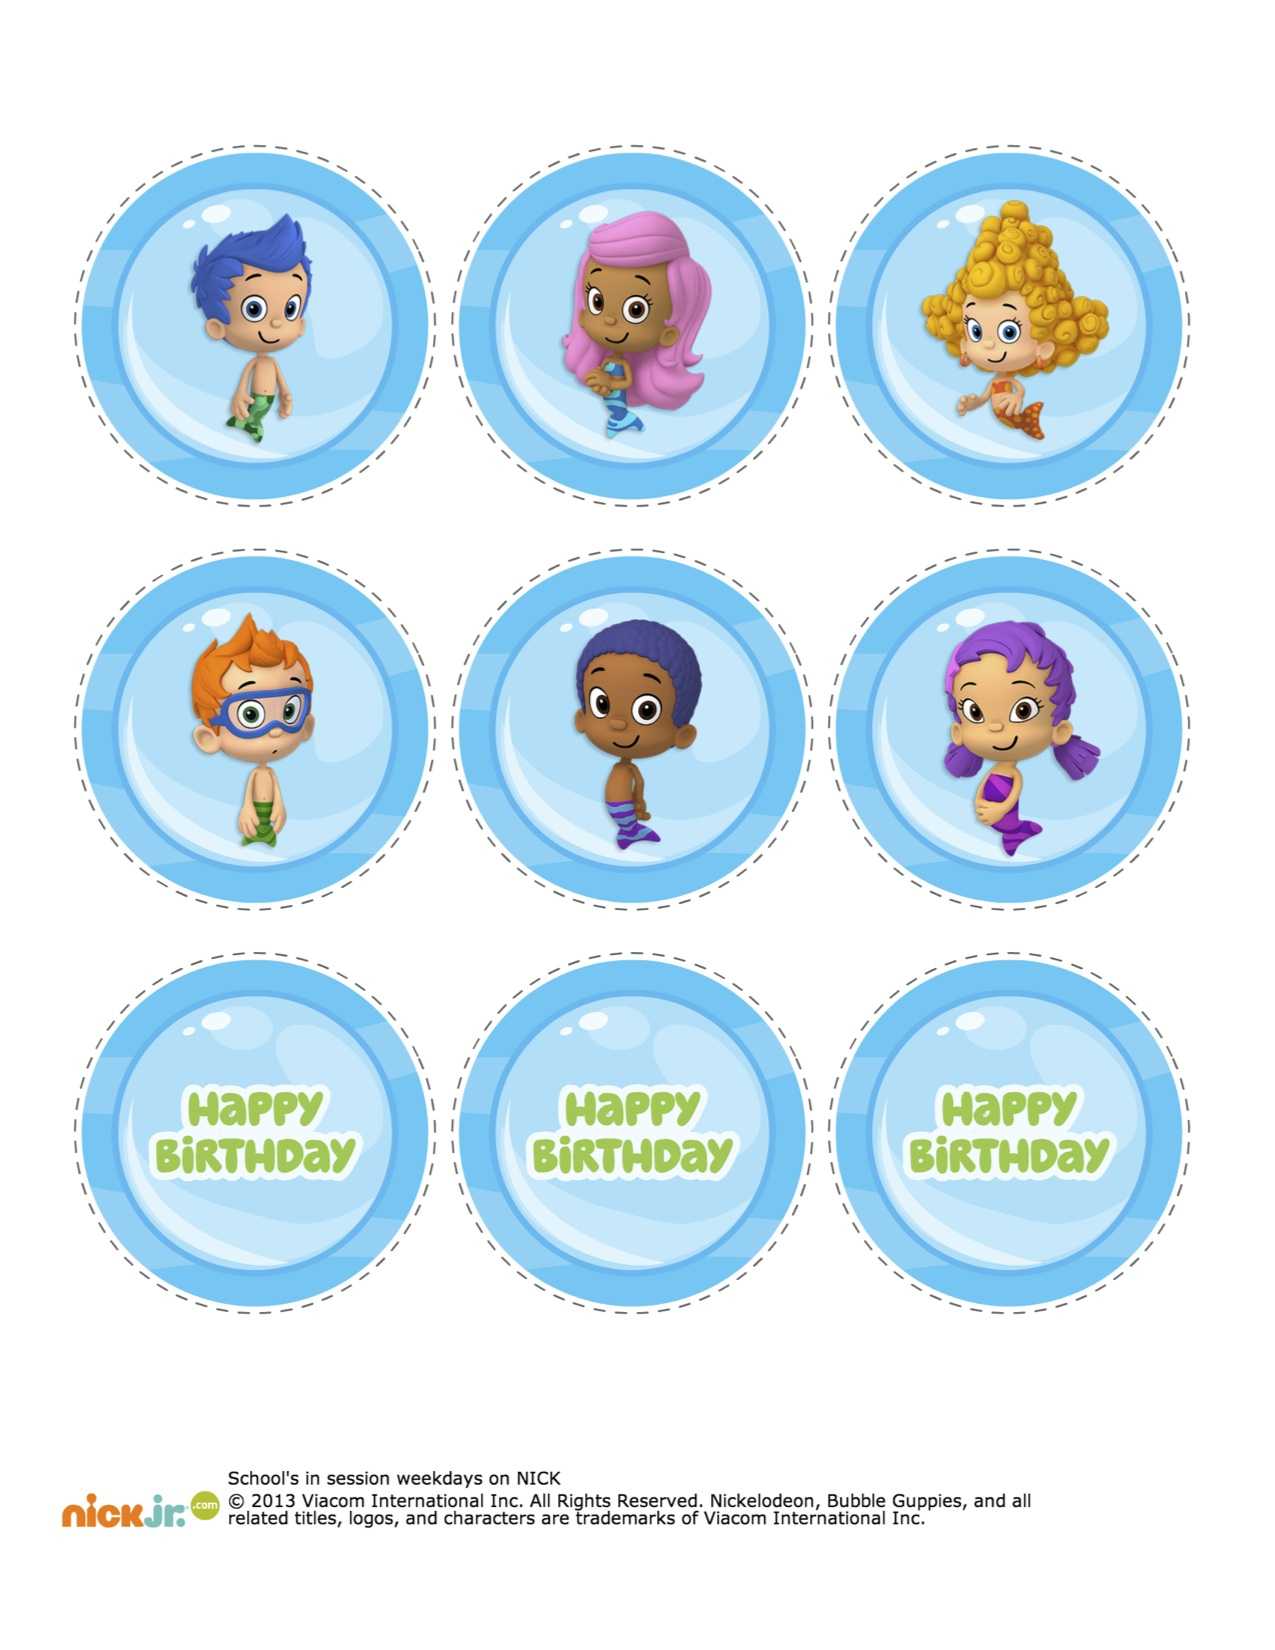 Bubble Guppies Birthday Banner Template – Atlantaauctionco Throughout Bubble Guppies Birthday Banner Template